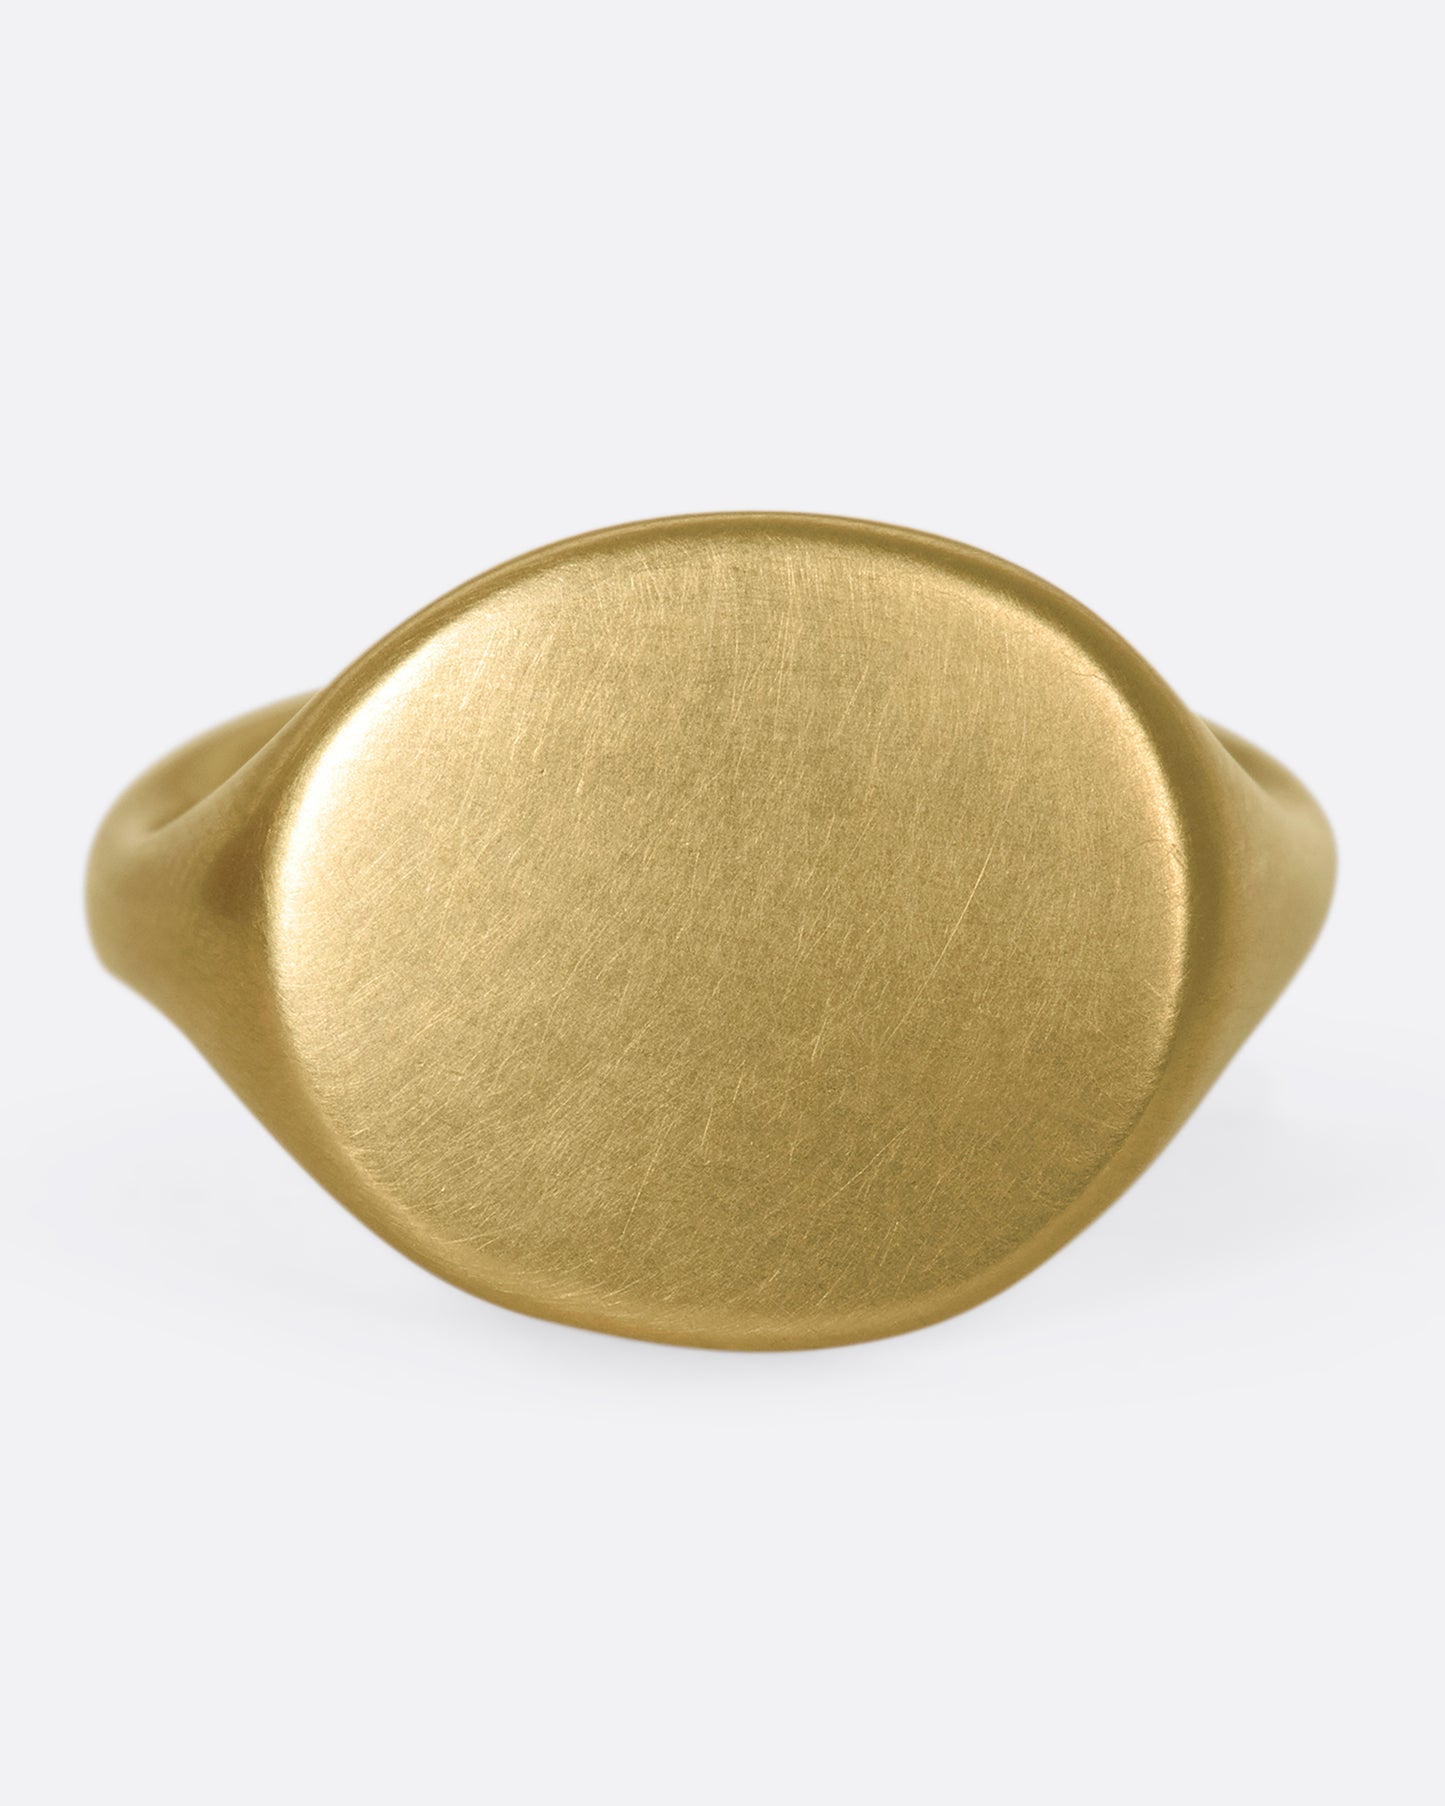 This solid 14k gold oval signet ring is incredibly soft and comfortable. The band is perfectly weighted, so the signet never falls to the side.